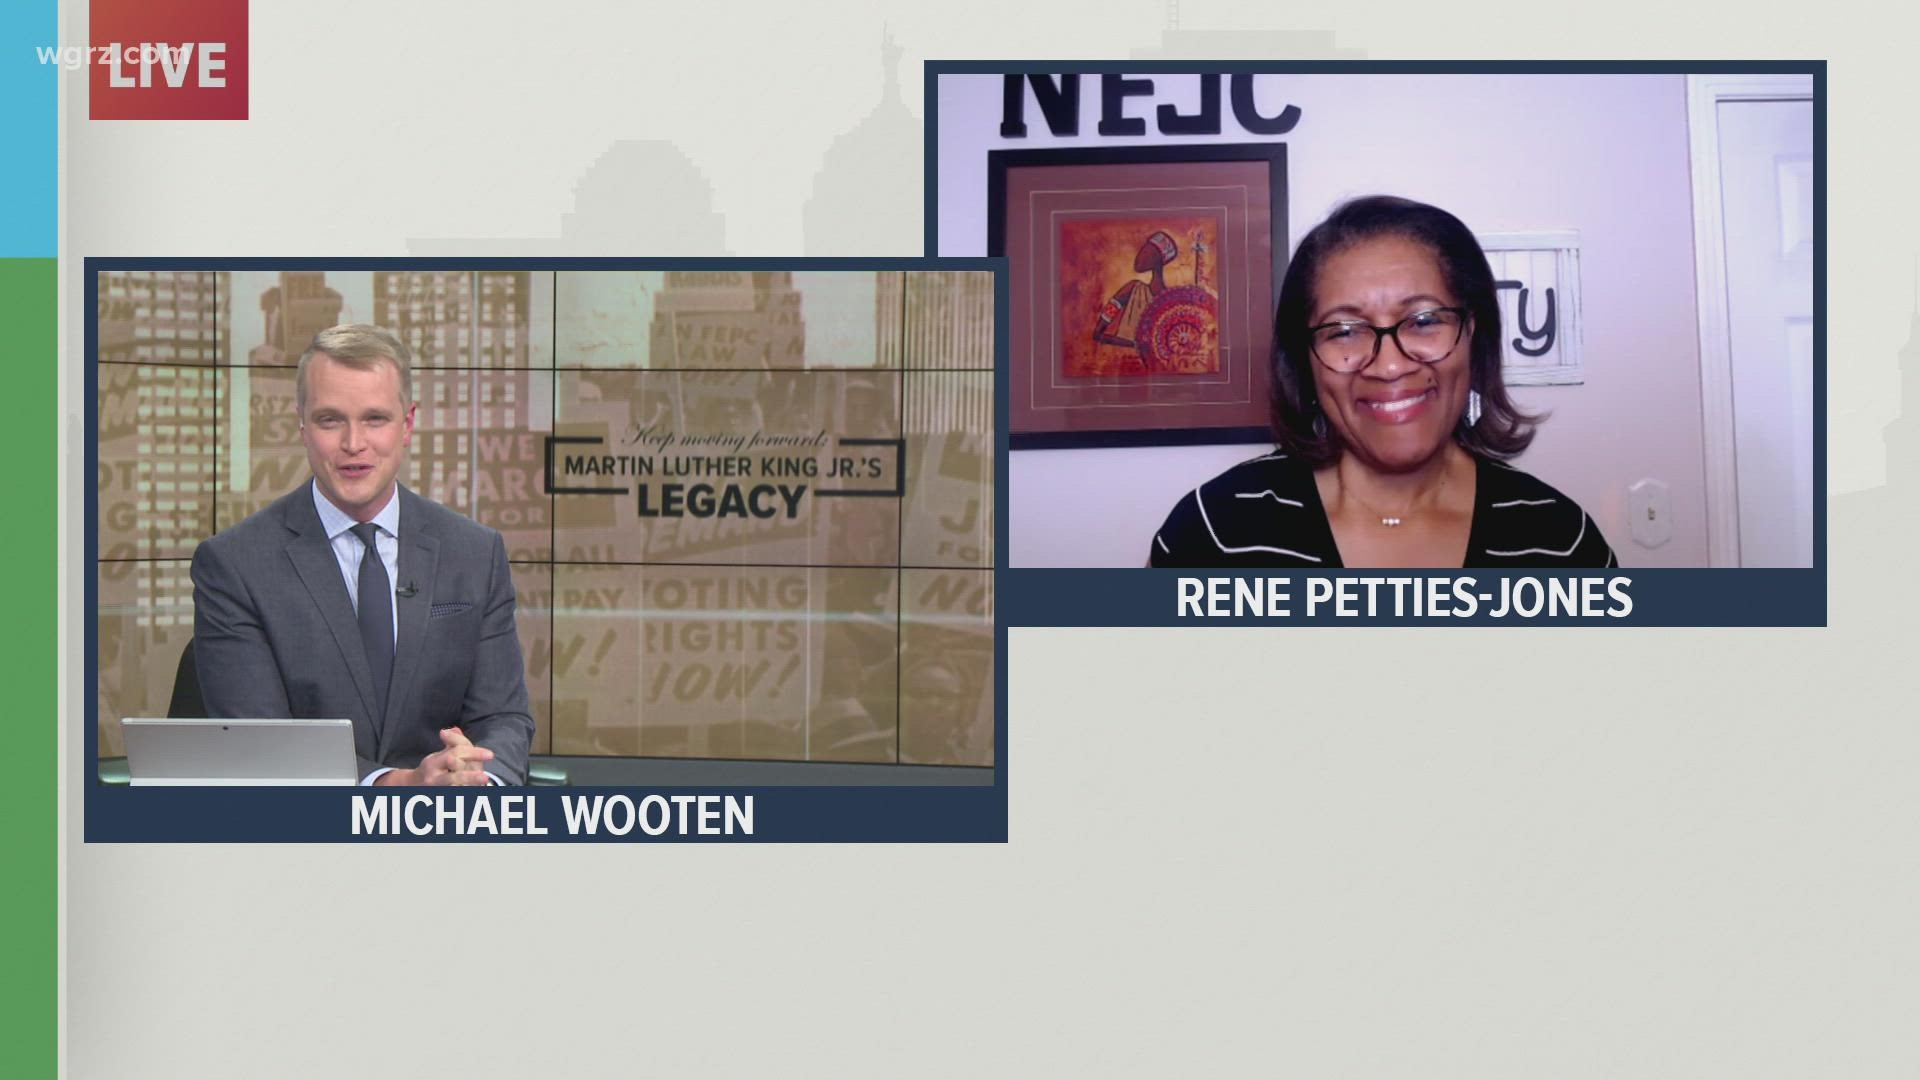 Rene Petties-Jones She's the president of the National Federation for just communities of Western New York. She gives us her insight on voting rights bills.